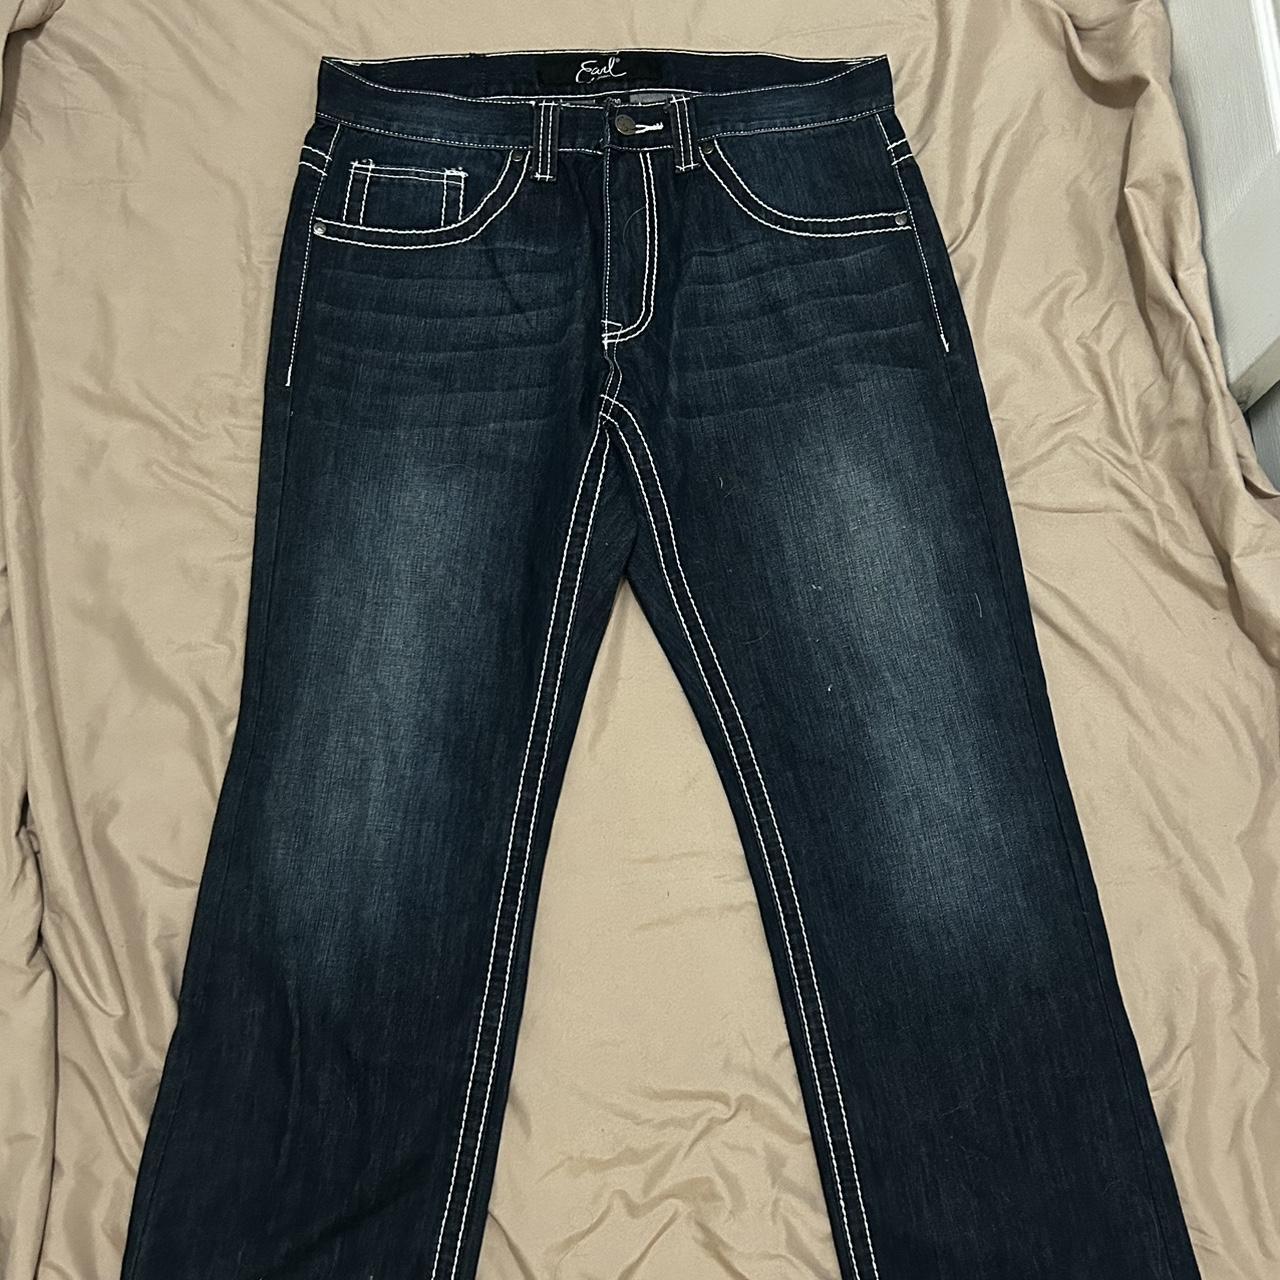 DO NOT BUY!!!!! , Earl jeans worn in good condition